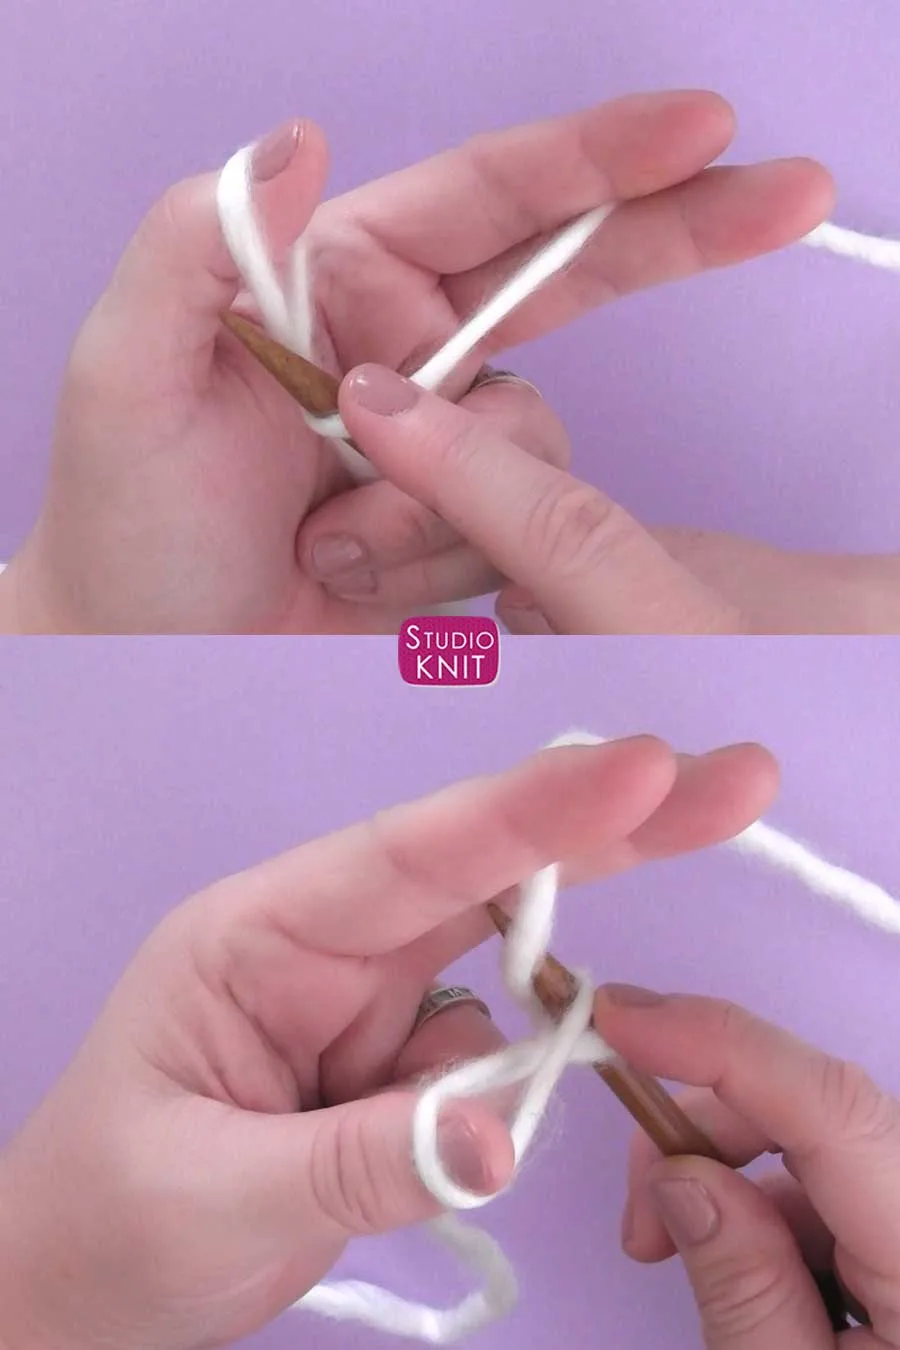 See How to Cast On Without a Slip Knot by Studio Knit